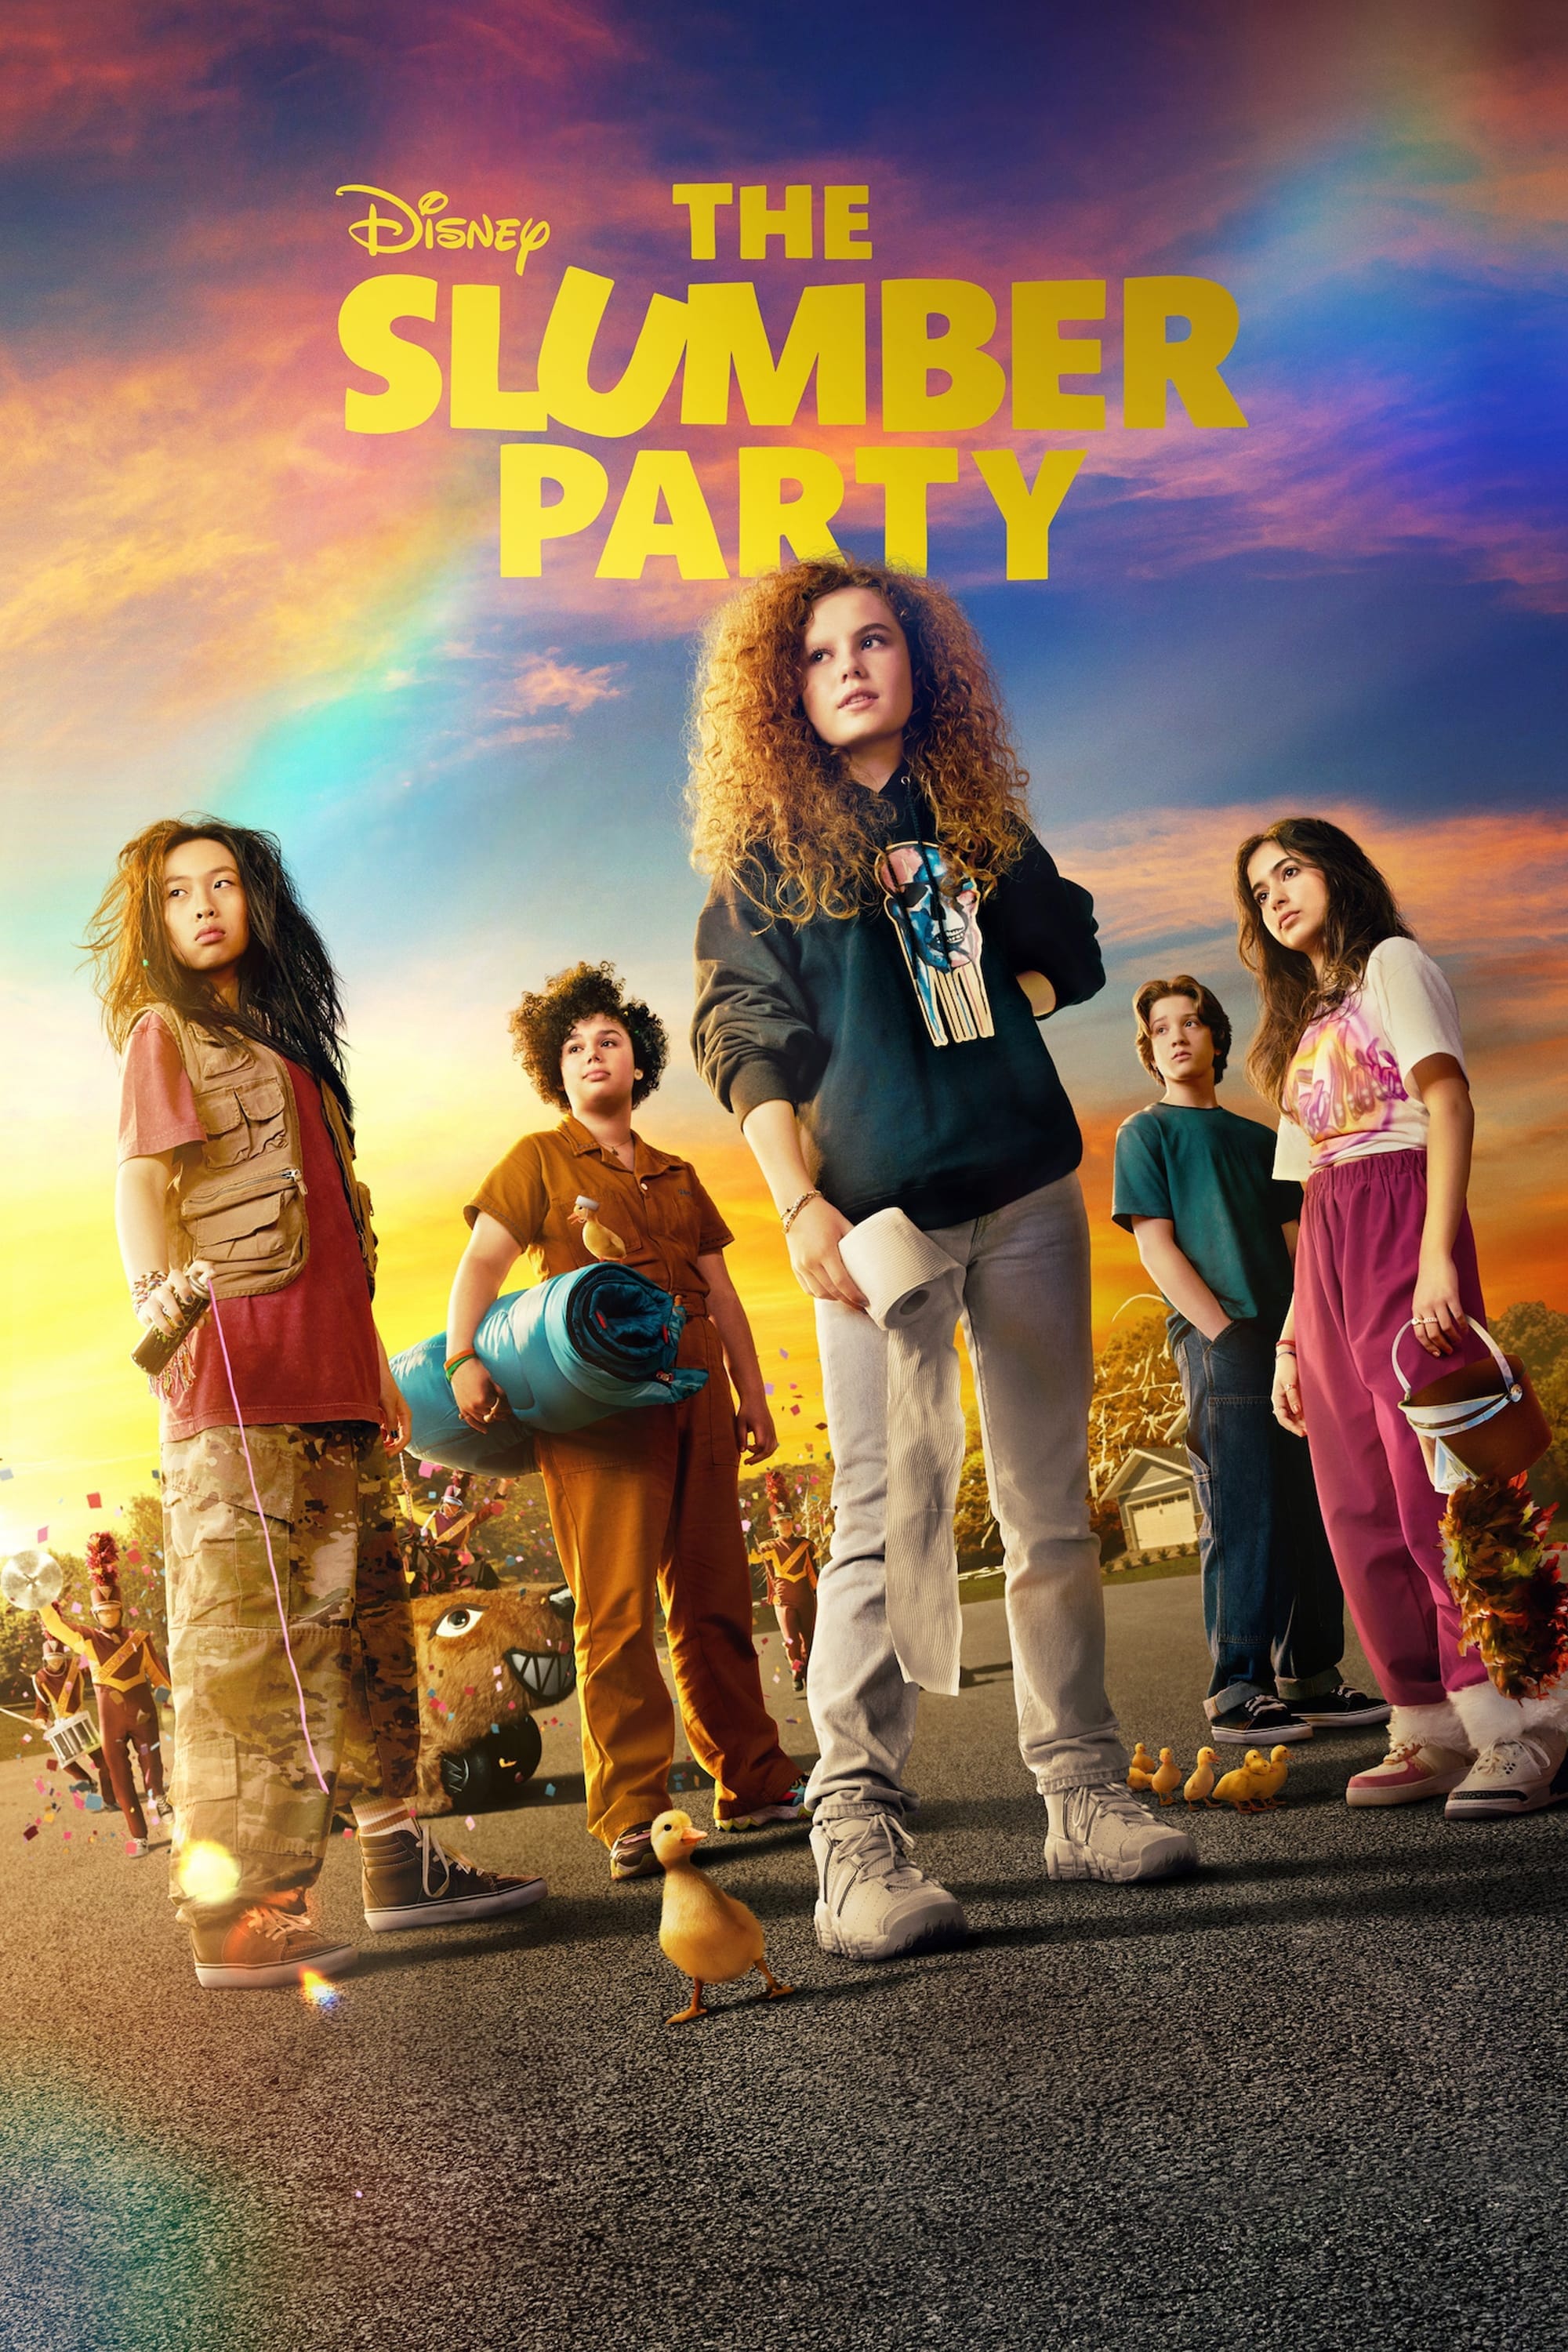 [WATCH 85+] The Slumber Party (2023) FULL MOVIE ONLINE FREE ENGLISH/Dub/SUB Comedy STREAMINGS ������ Movie Poster